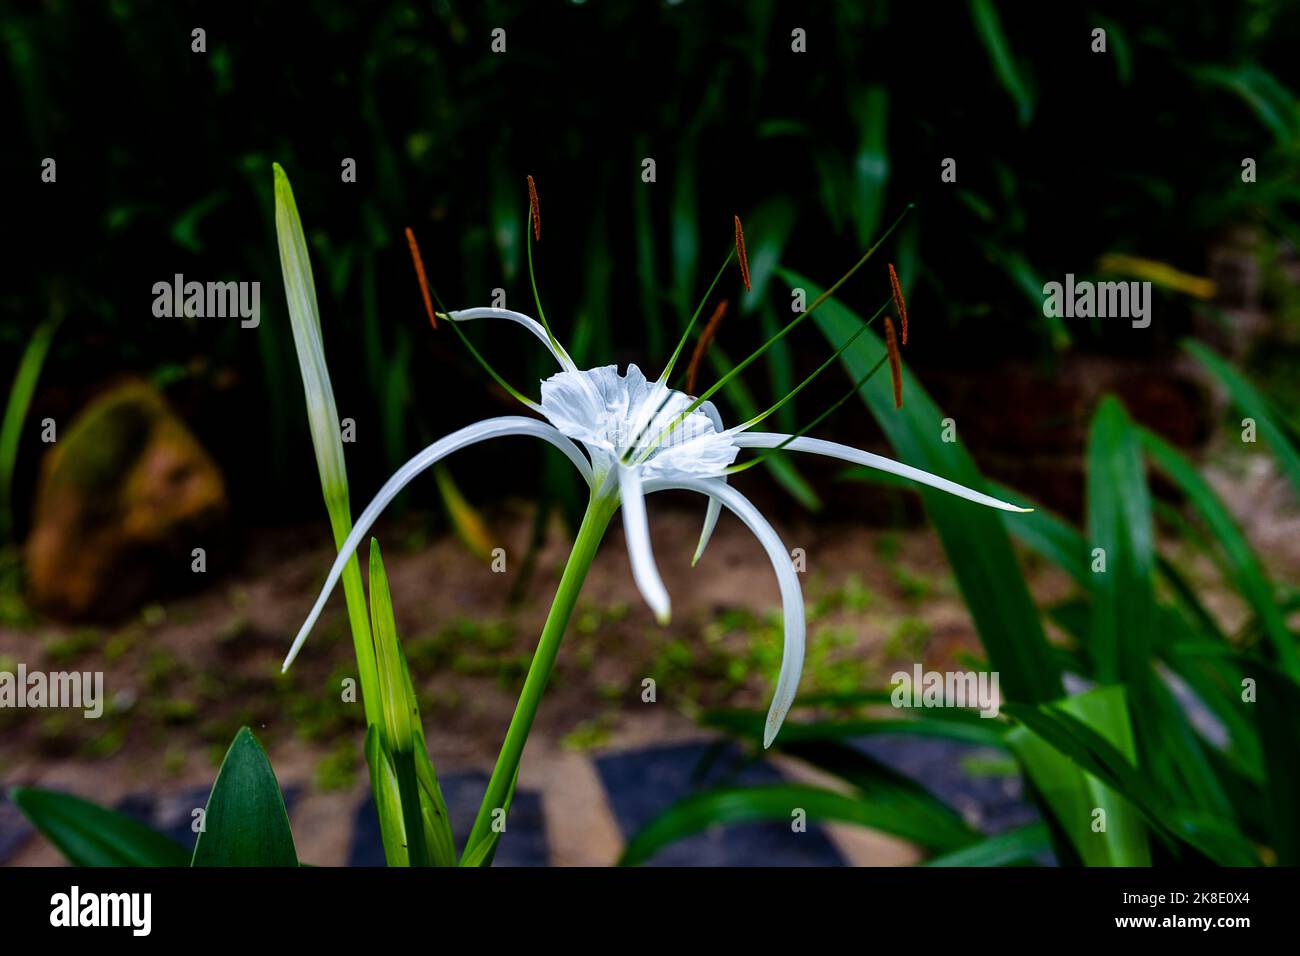 Spider lilly growing again a green garden area. Stock Photo